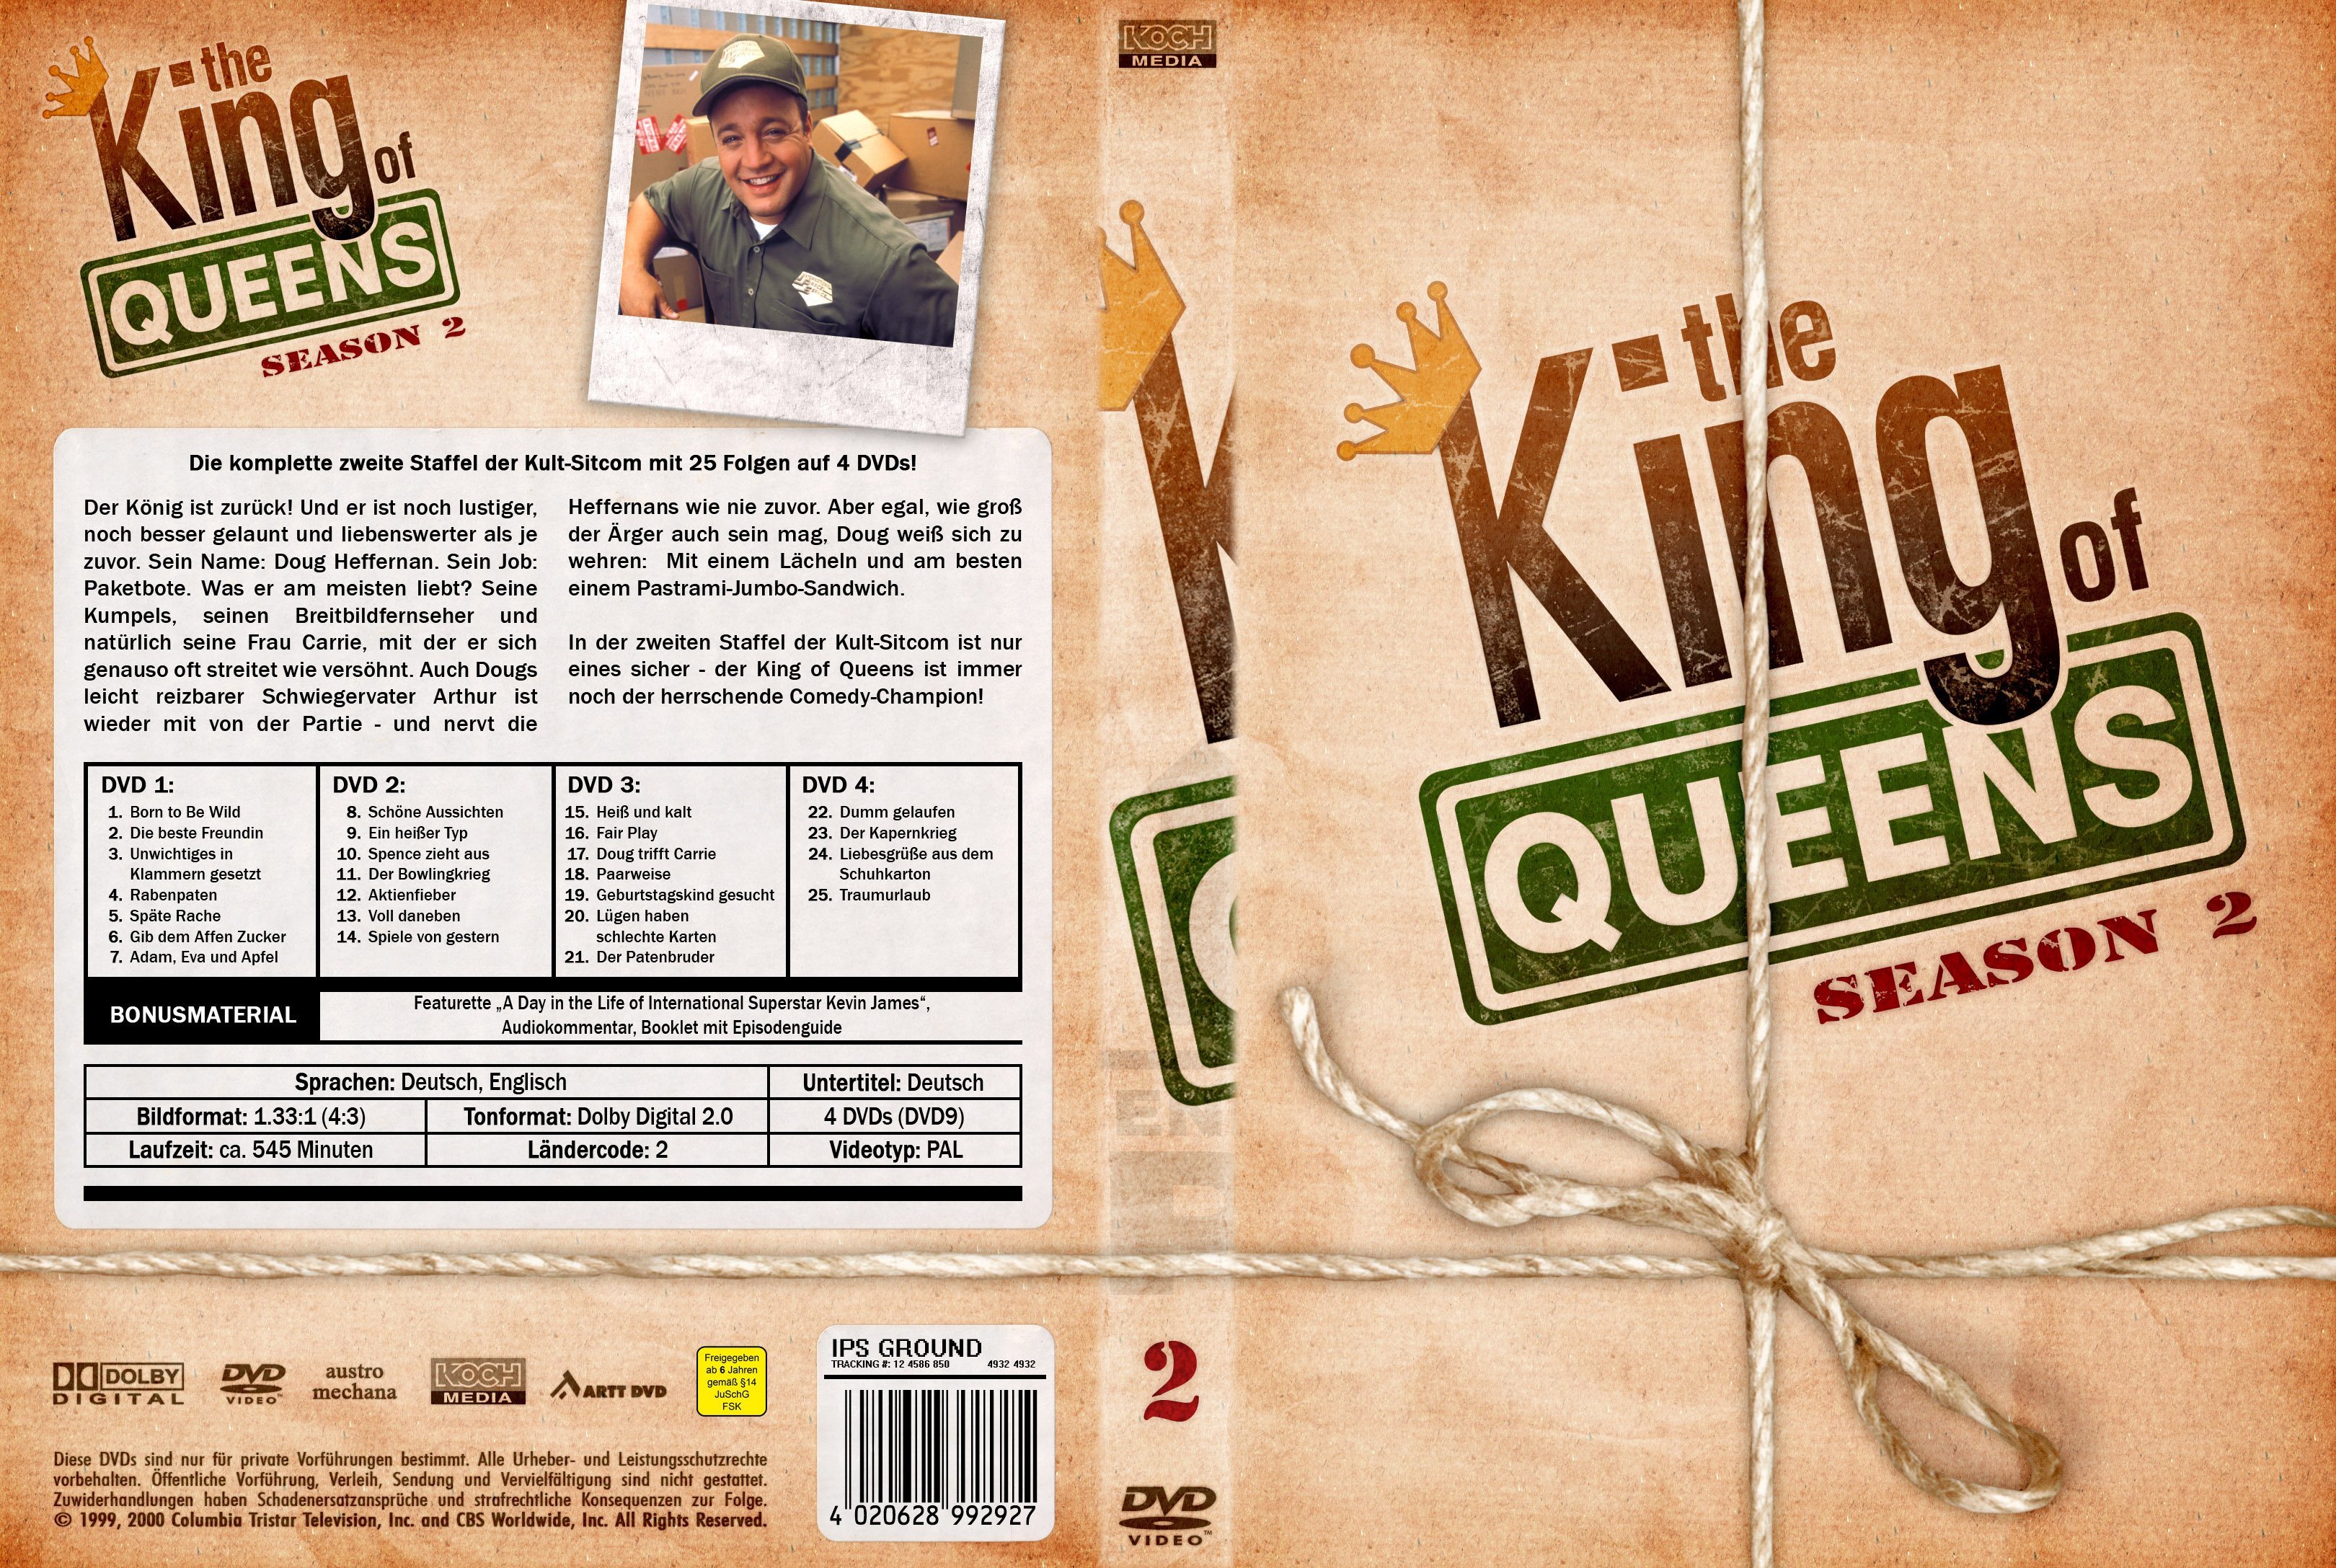 The King Of Queens Staffel 2 Dvd Covers Cover Century Over 1000000 Album Art Covers For Free